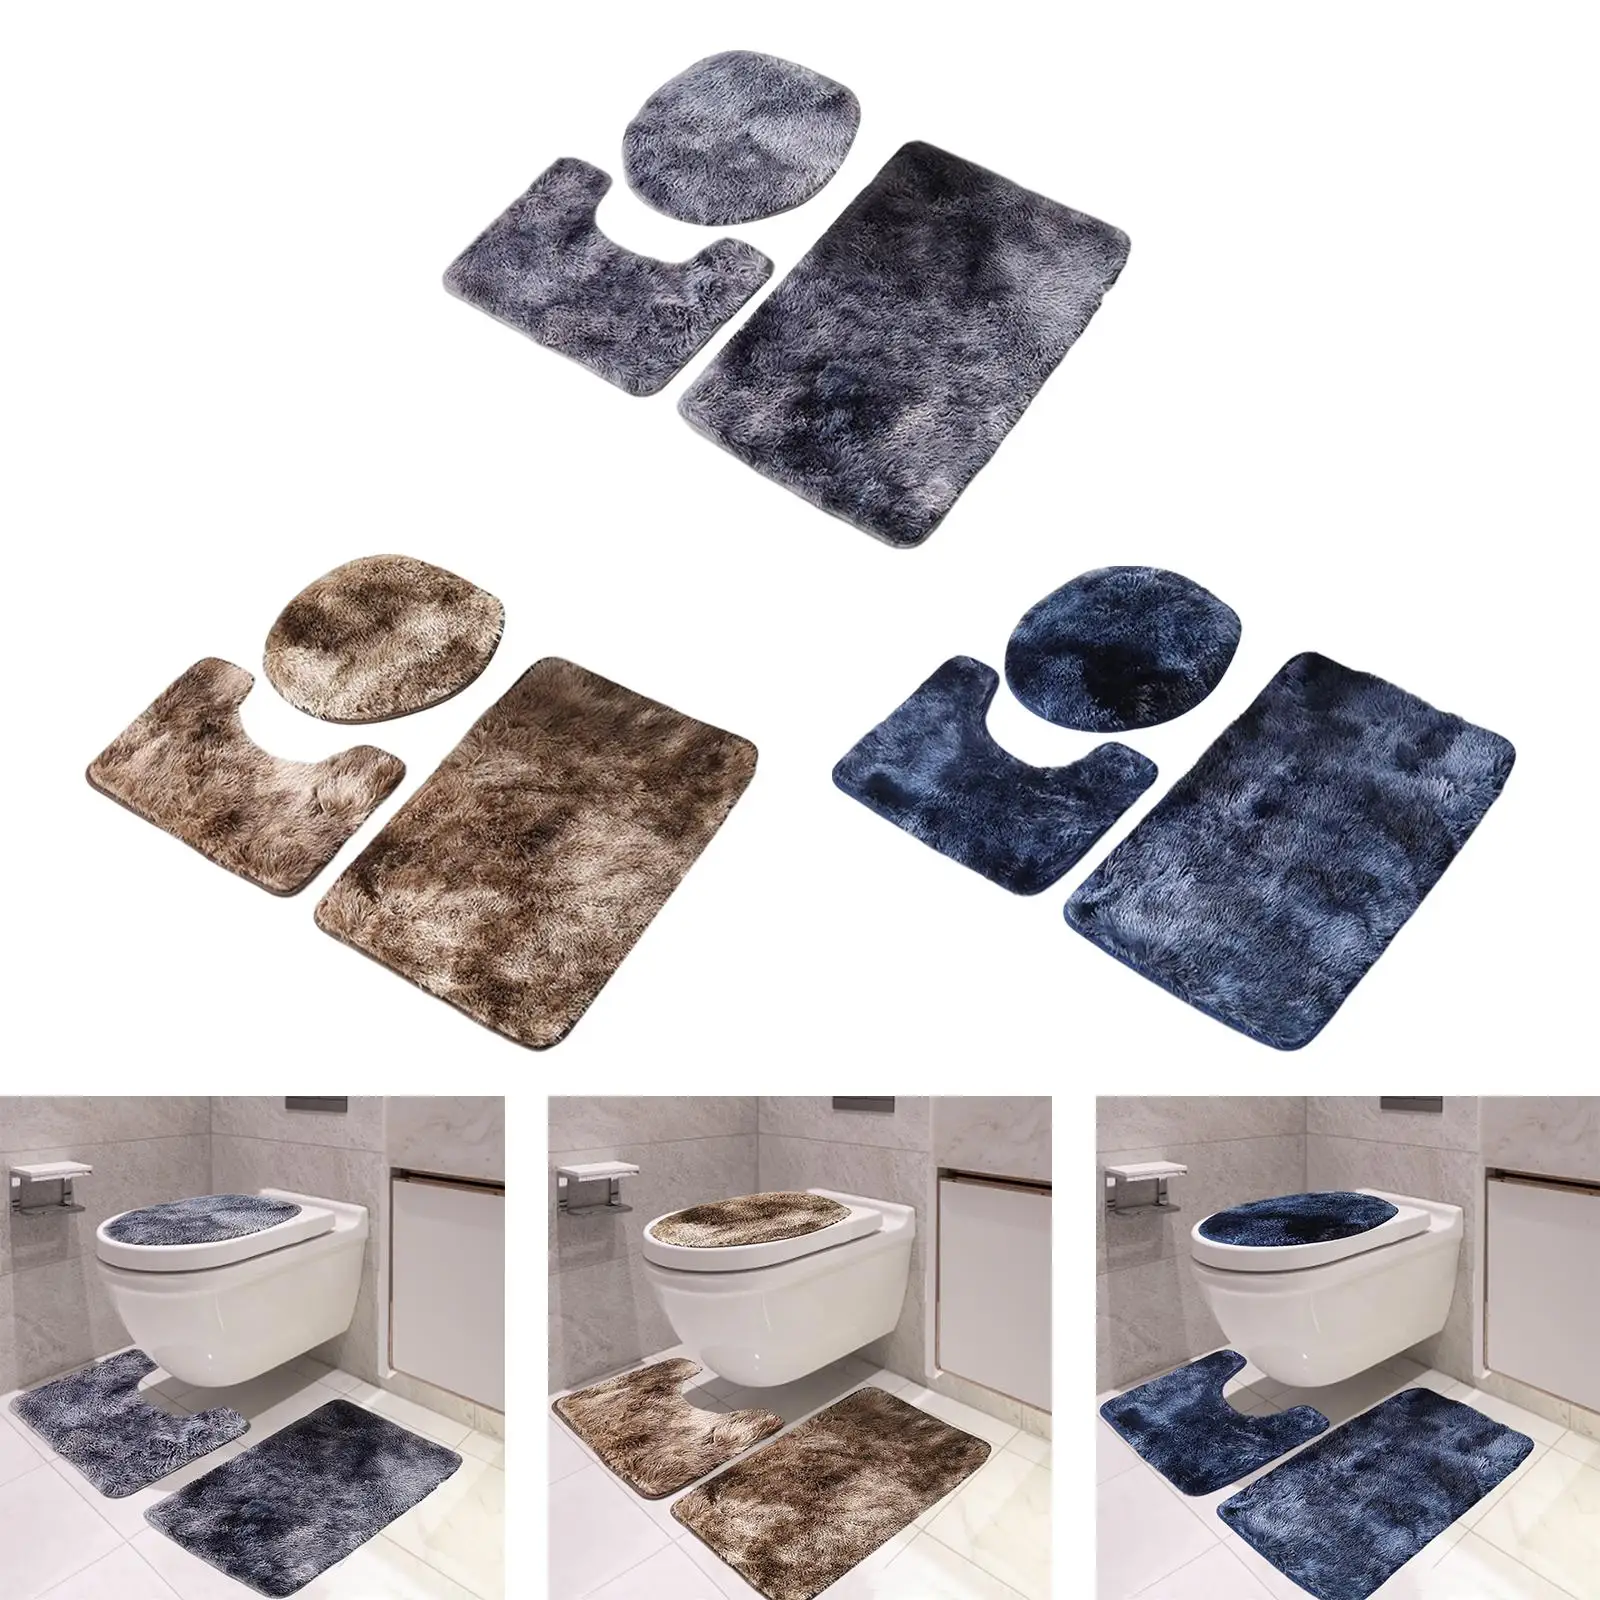 3 Pieces Cozy Bathroom Rug Sets with Toilet Cover Absorbent Bath Mats Set for Bathroom Shower Bathroom Floors Tub Under The Sink